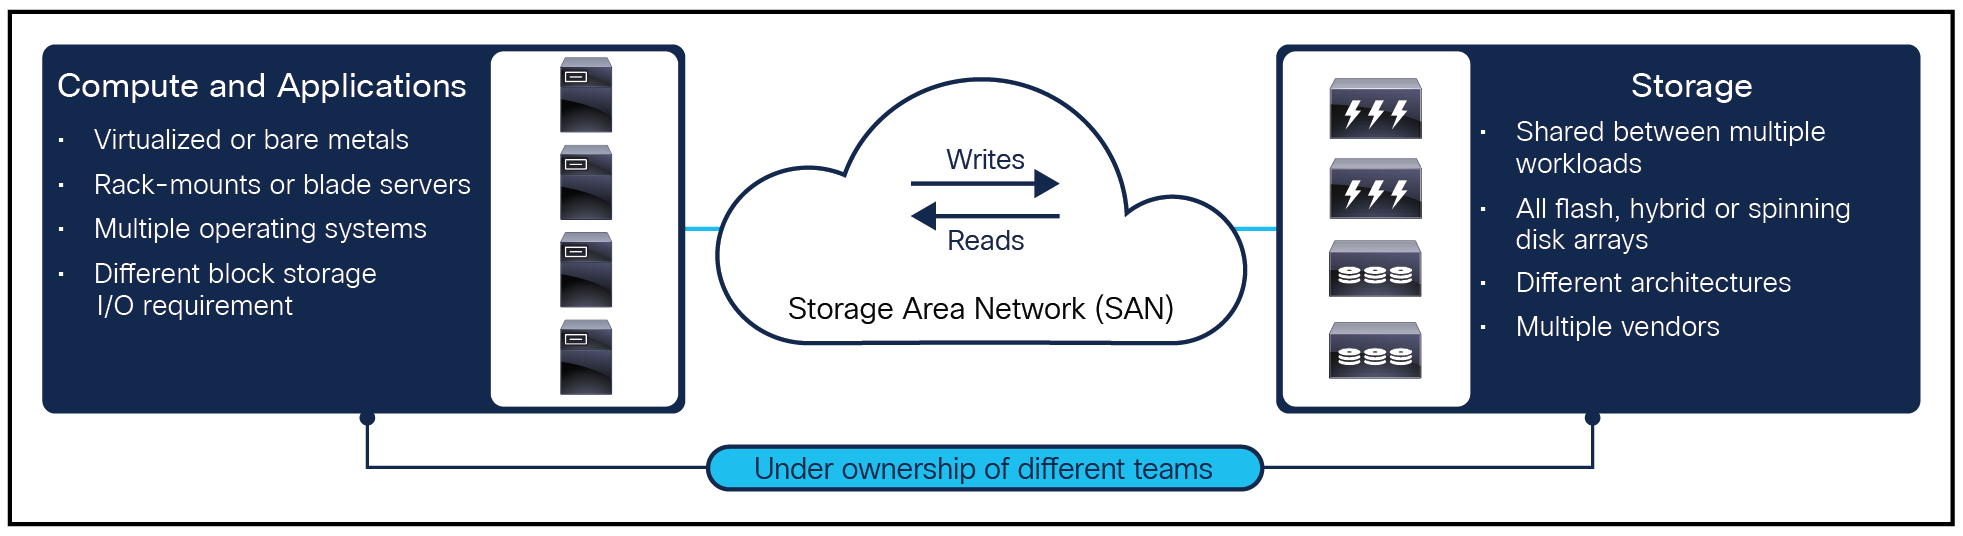 Challenges in getting visibility into enterprise storage infrastructure